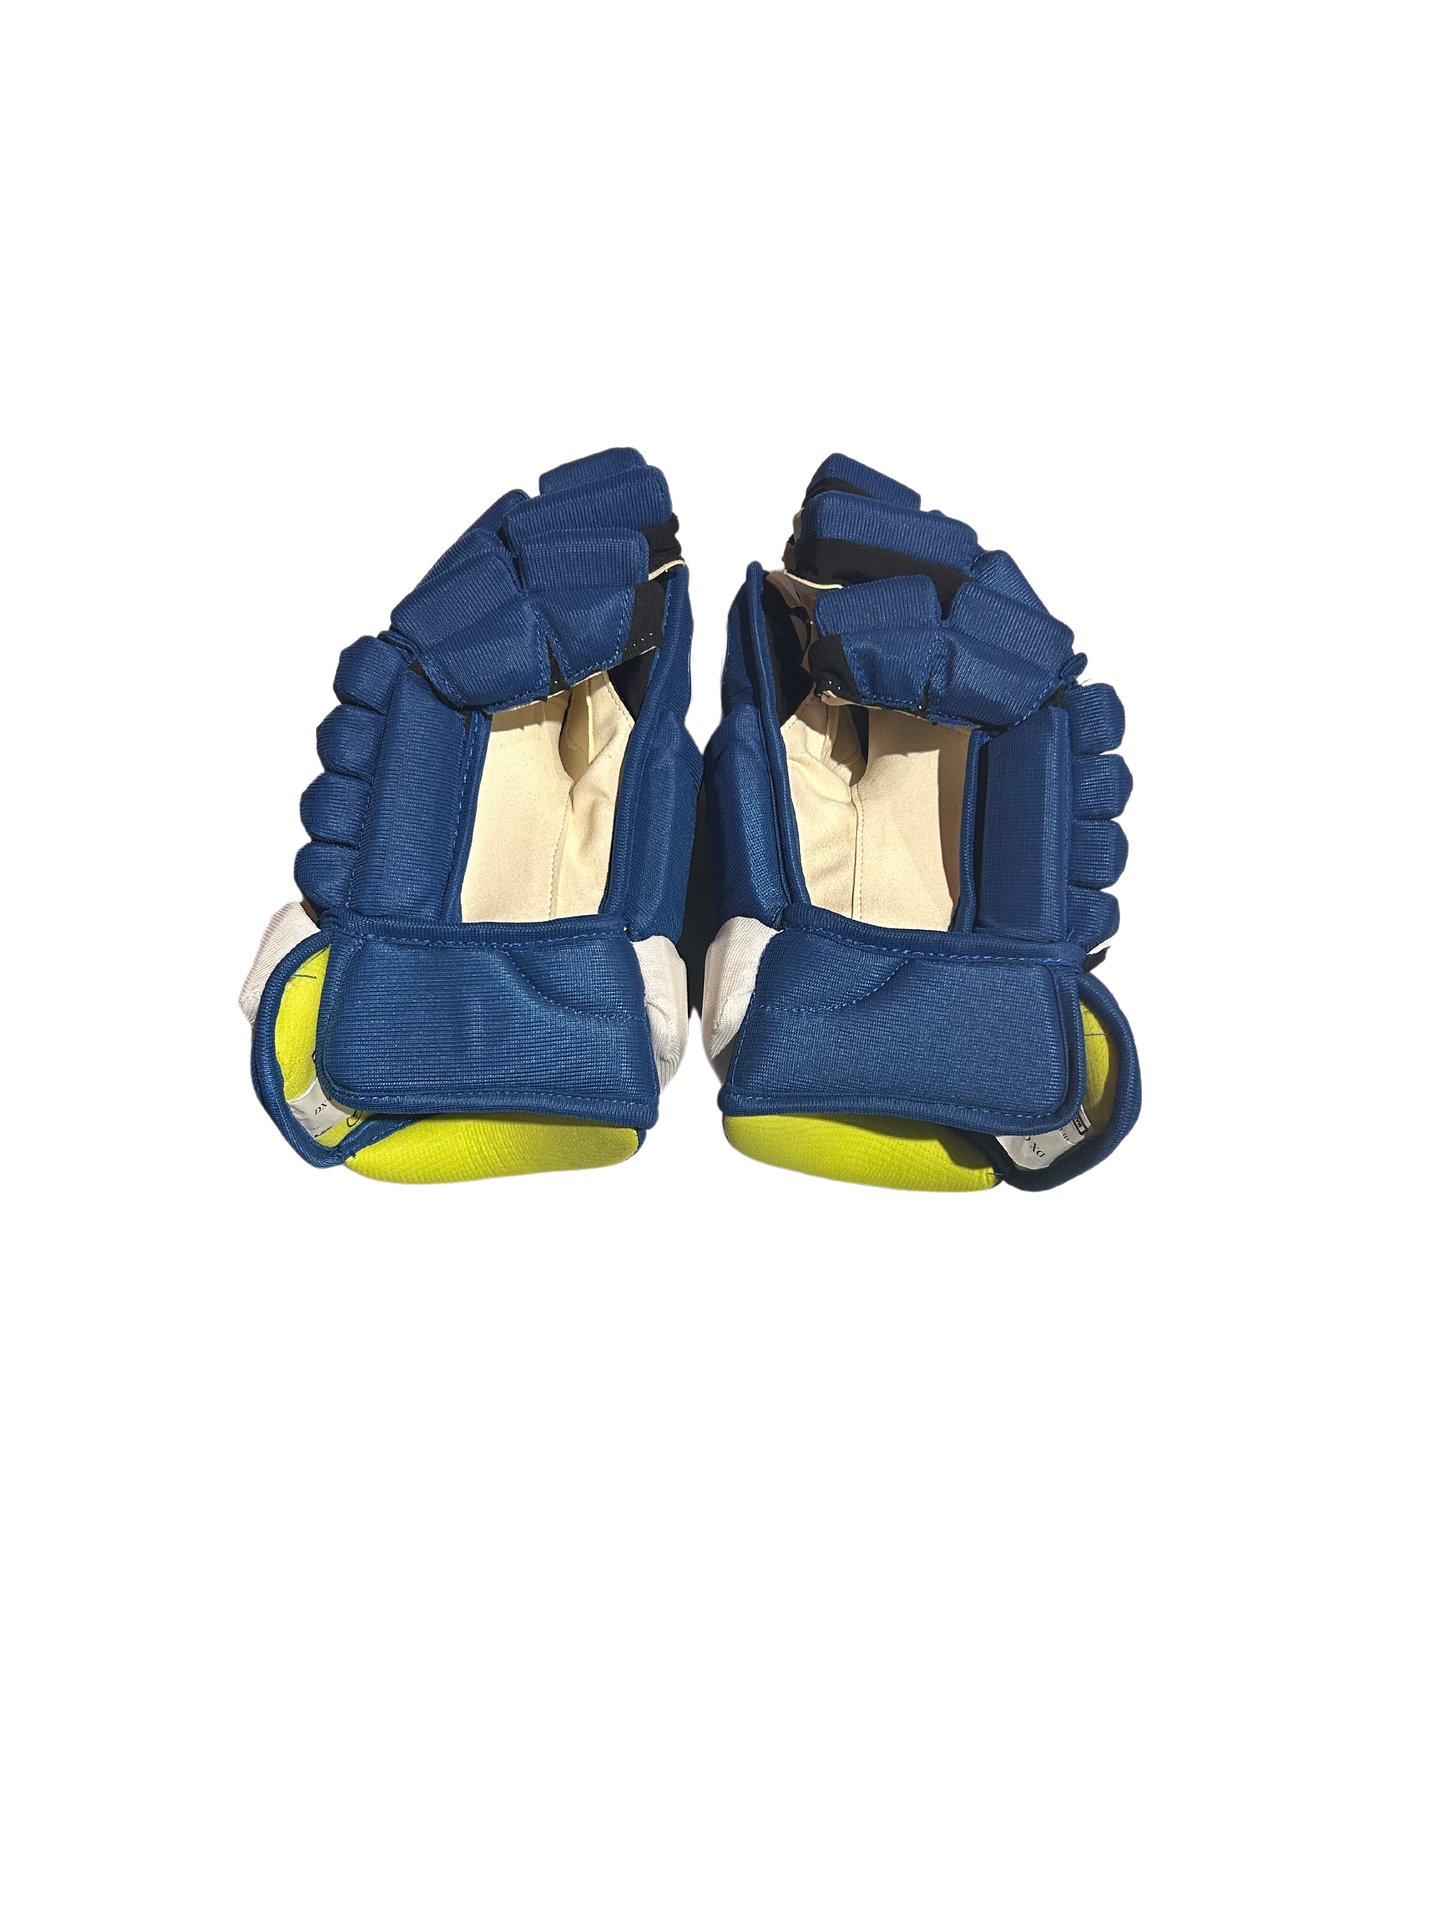 New Blue Colorado Avalanche 14" Warrior DX Pro Gloves (Multiple Players)